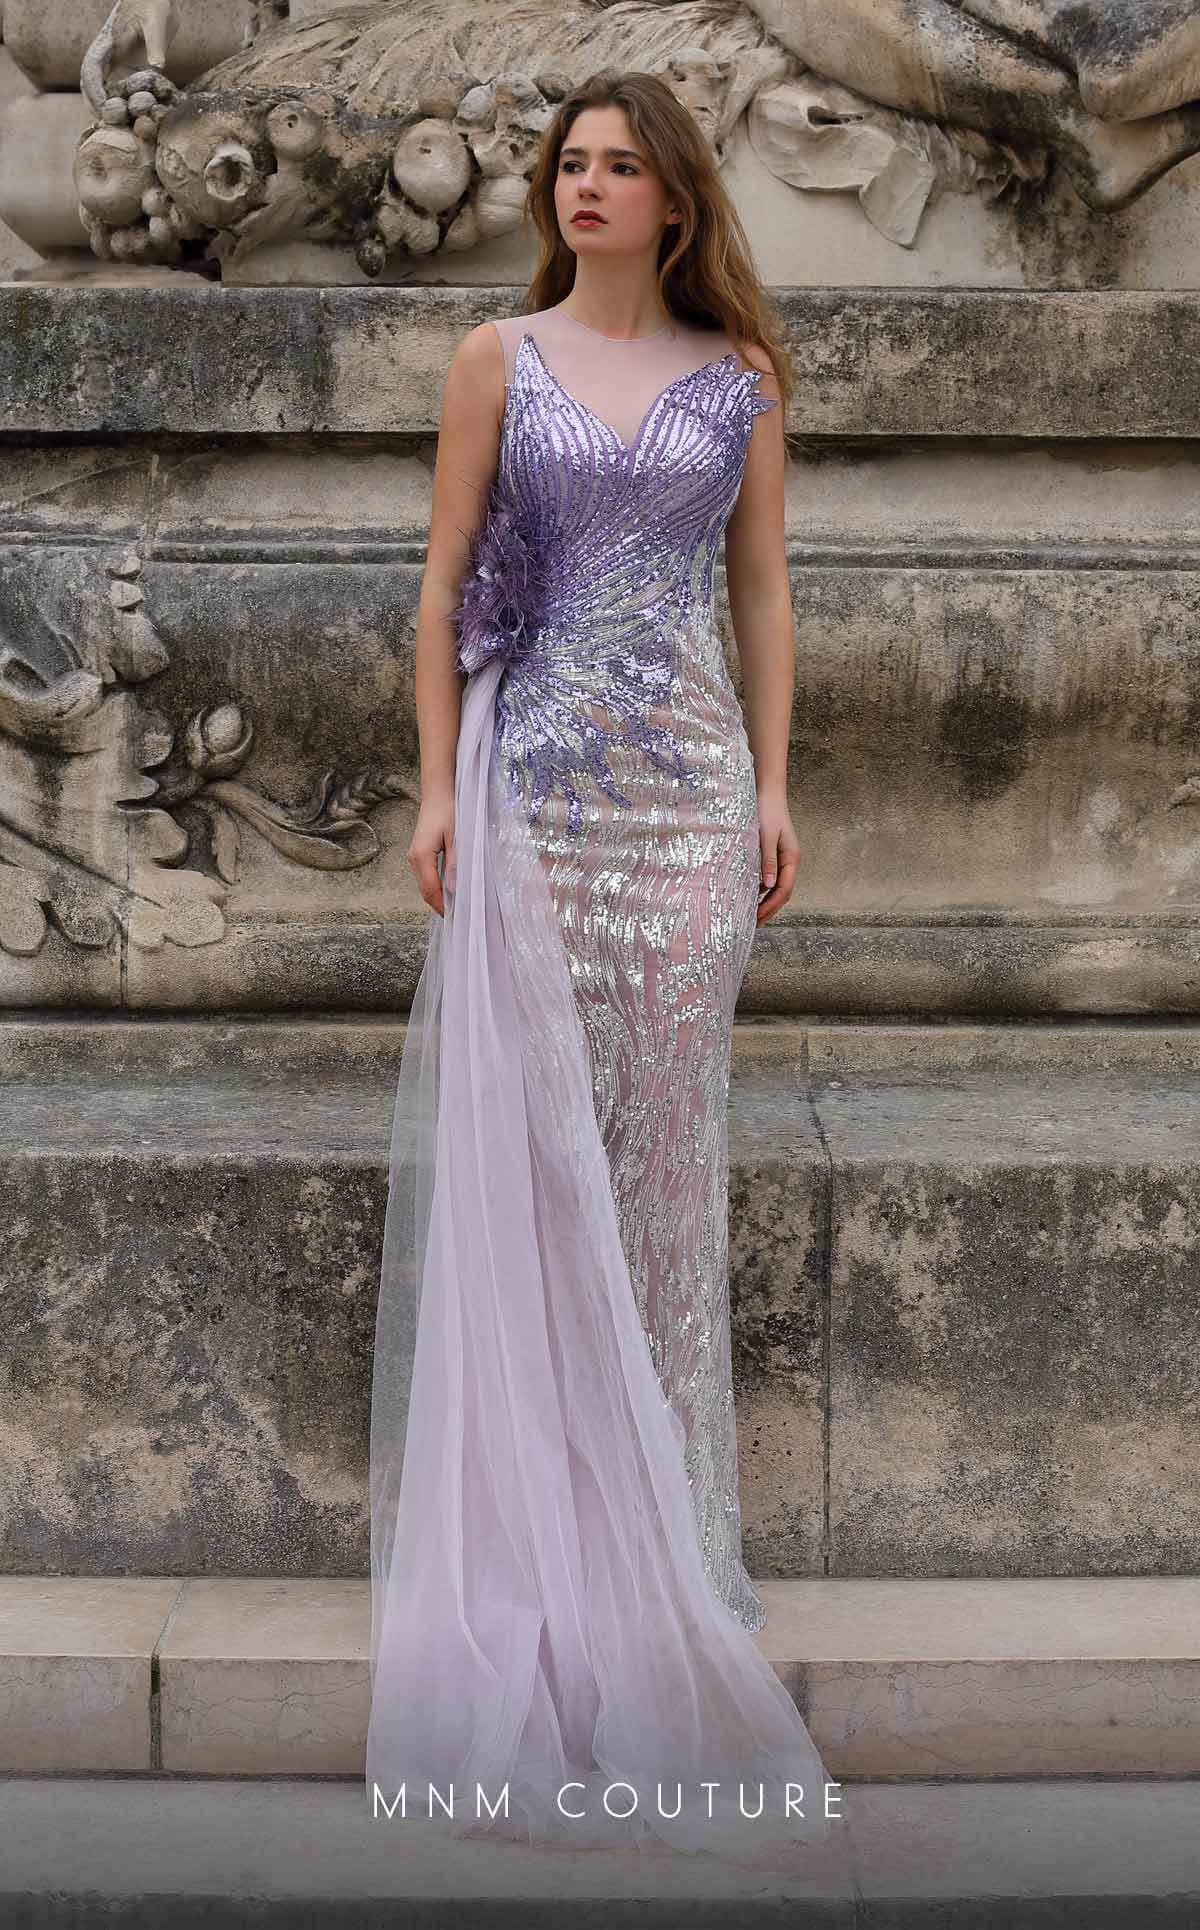 Image of MNM Couture K4056 - Illusion Neckline Embellished Gown